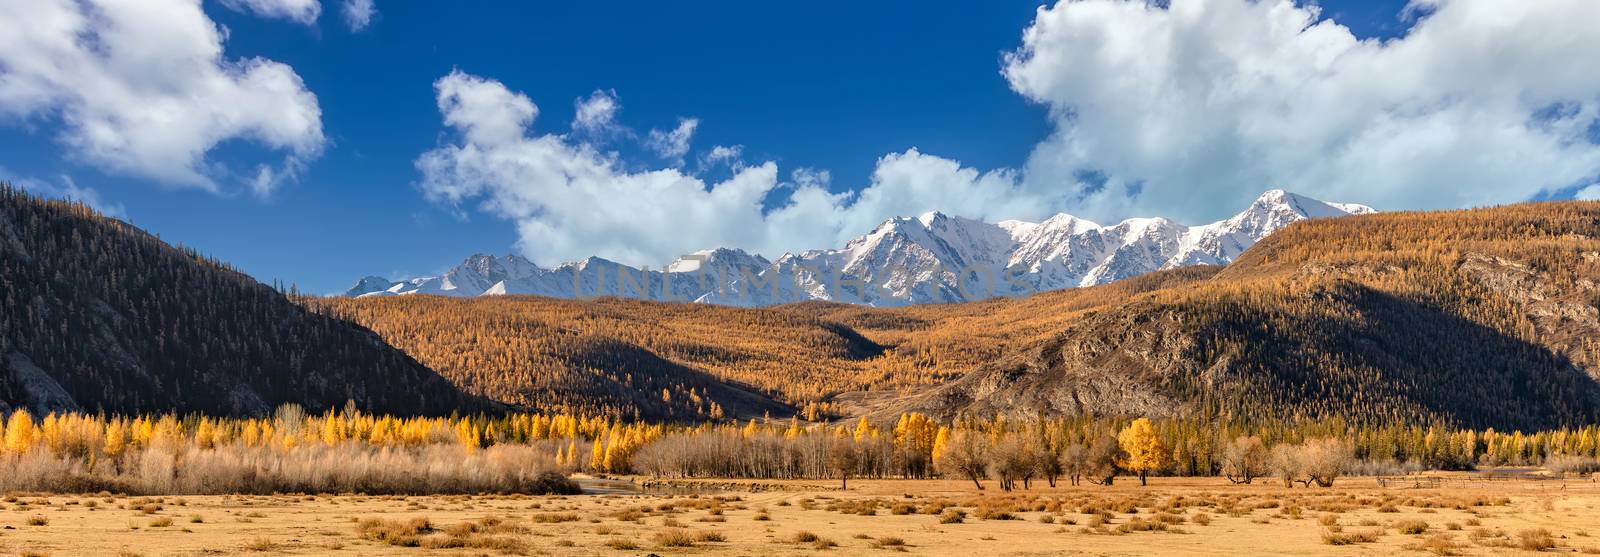 Scenic panoramic low angle view of a valley full of golden trees. Snowy mountain peaks of North Chuyskiy ridge in the background. Beautiful blue sky as a backdrop.. Altai mountains, Siberia, Russia